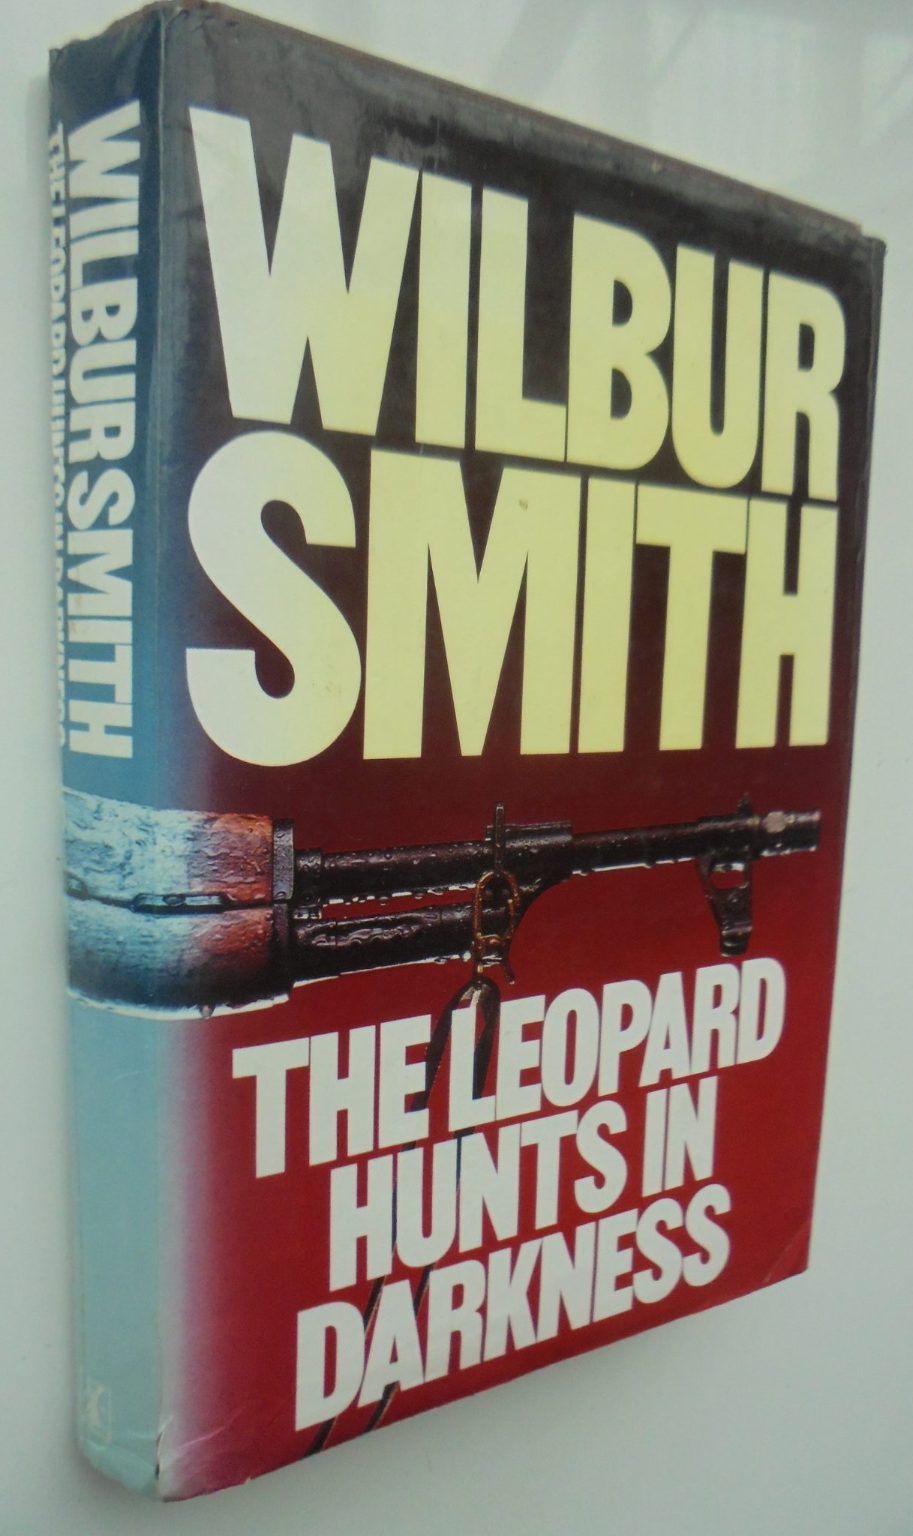 The Leopard Hunts in Darkness. By Wilbur Smith - 1984, First Edition.